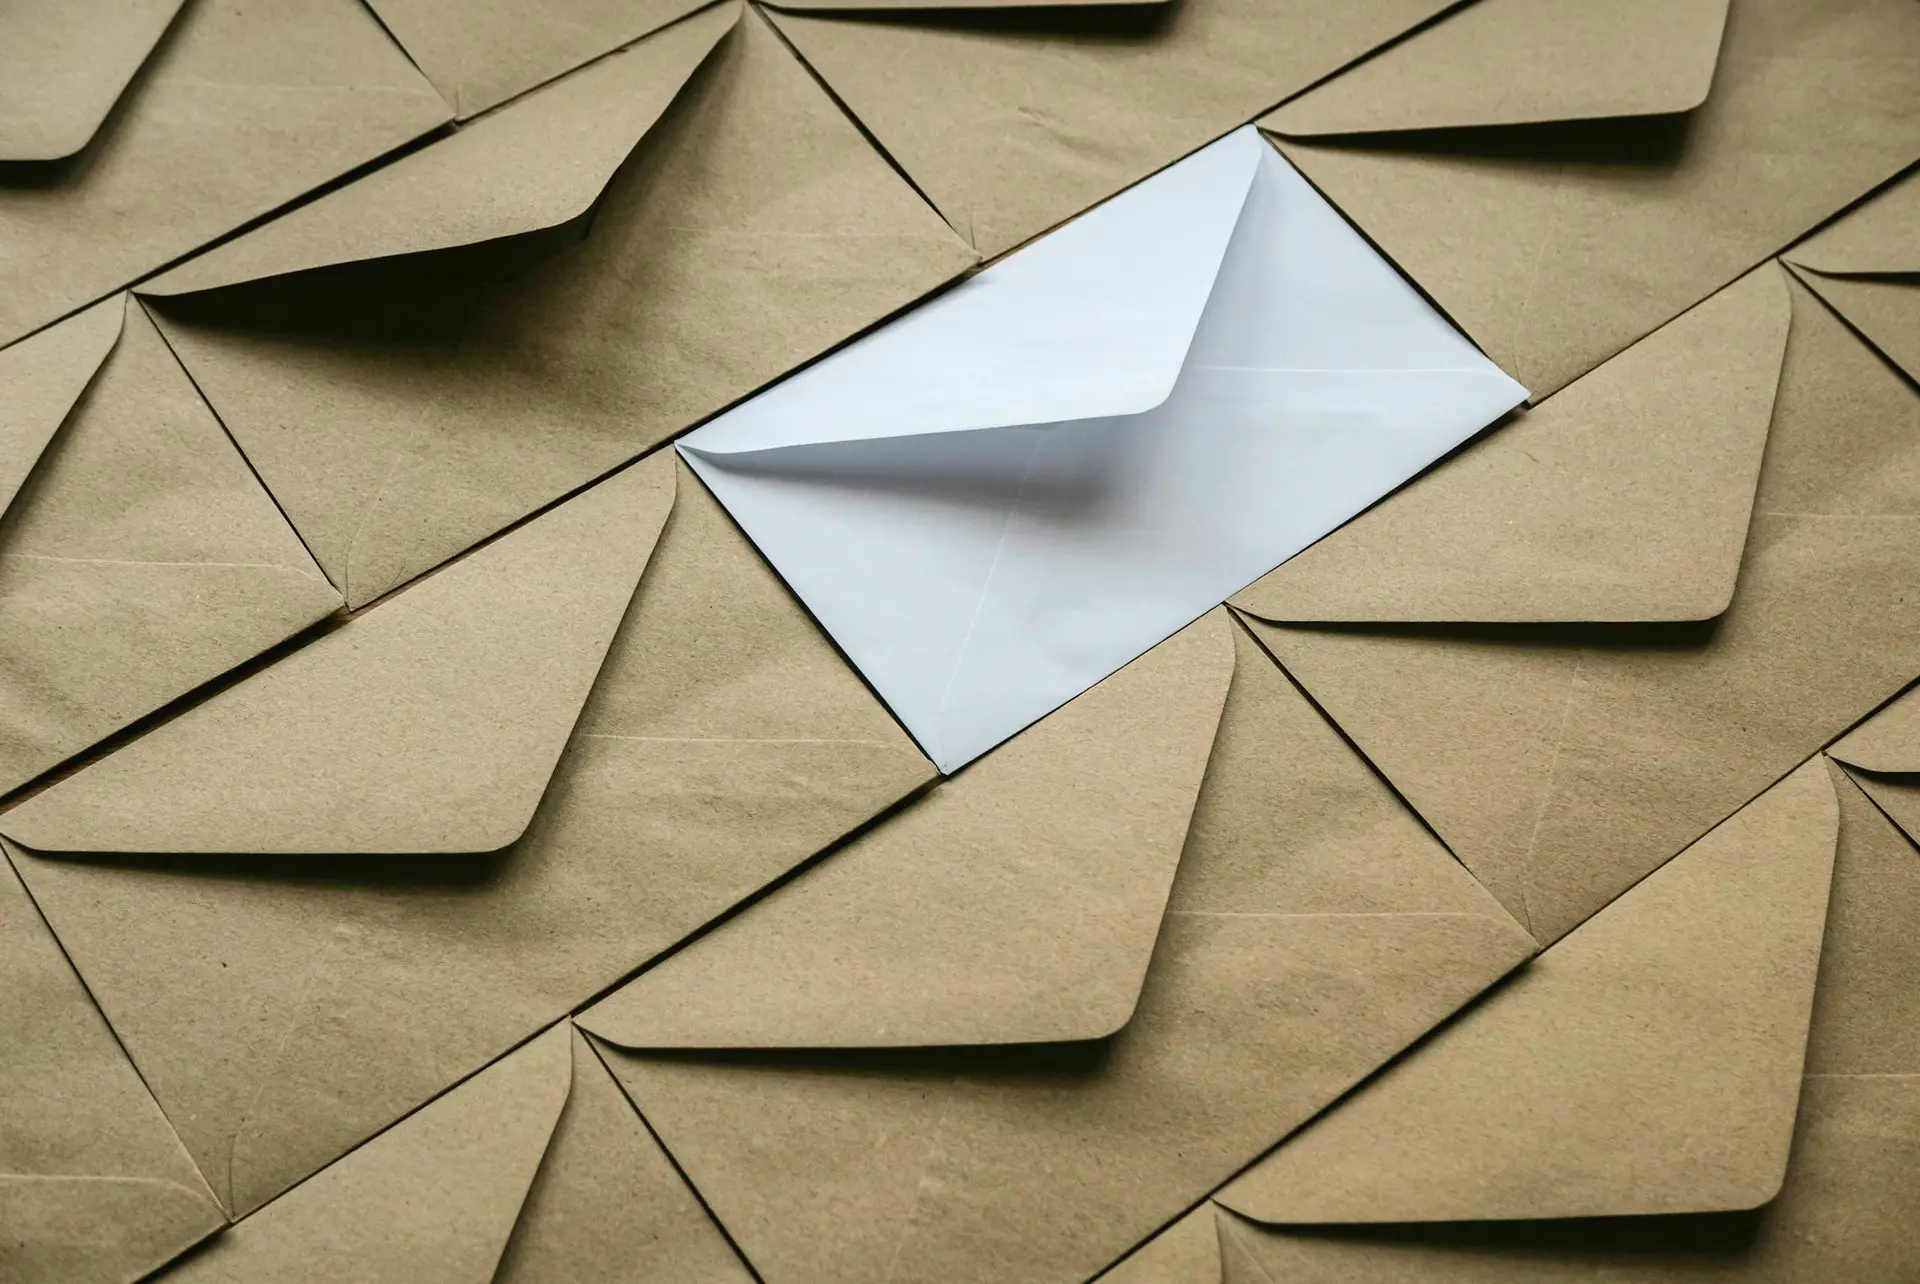 A white envelope among a brown craft envelopes in a row.